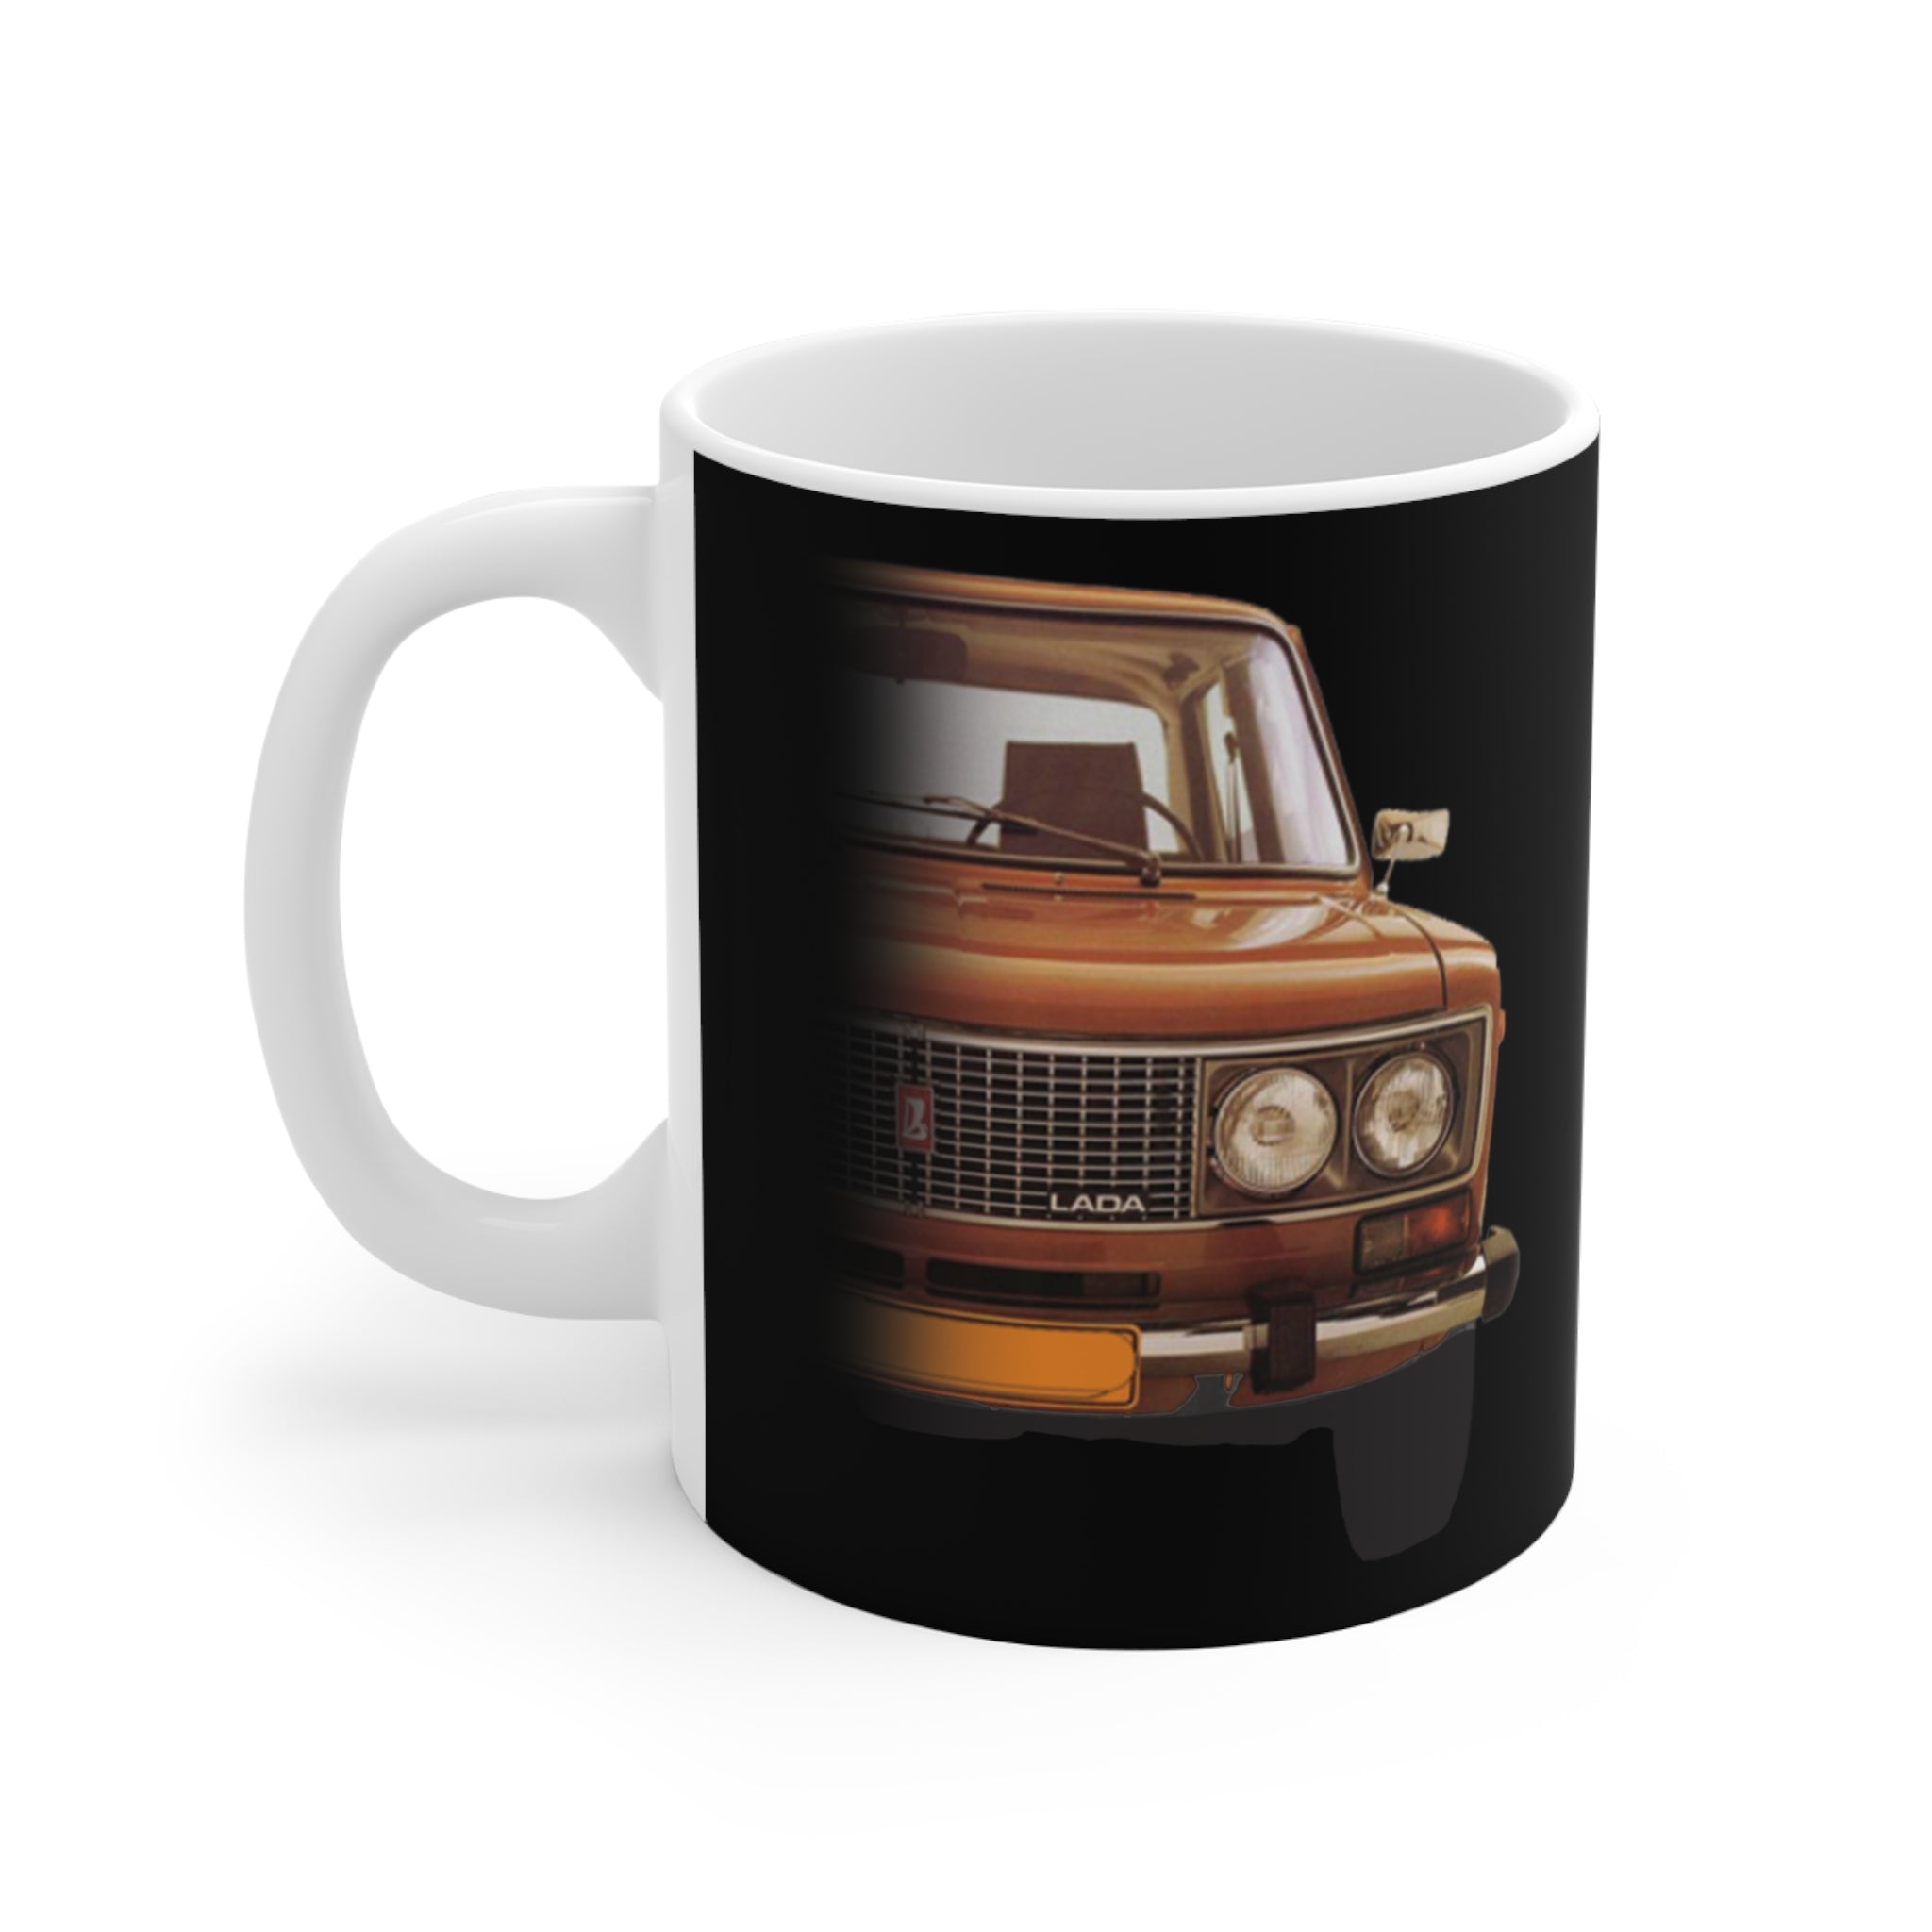 This is Kruto CAR Coffee Cup